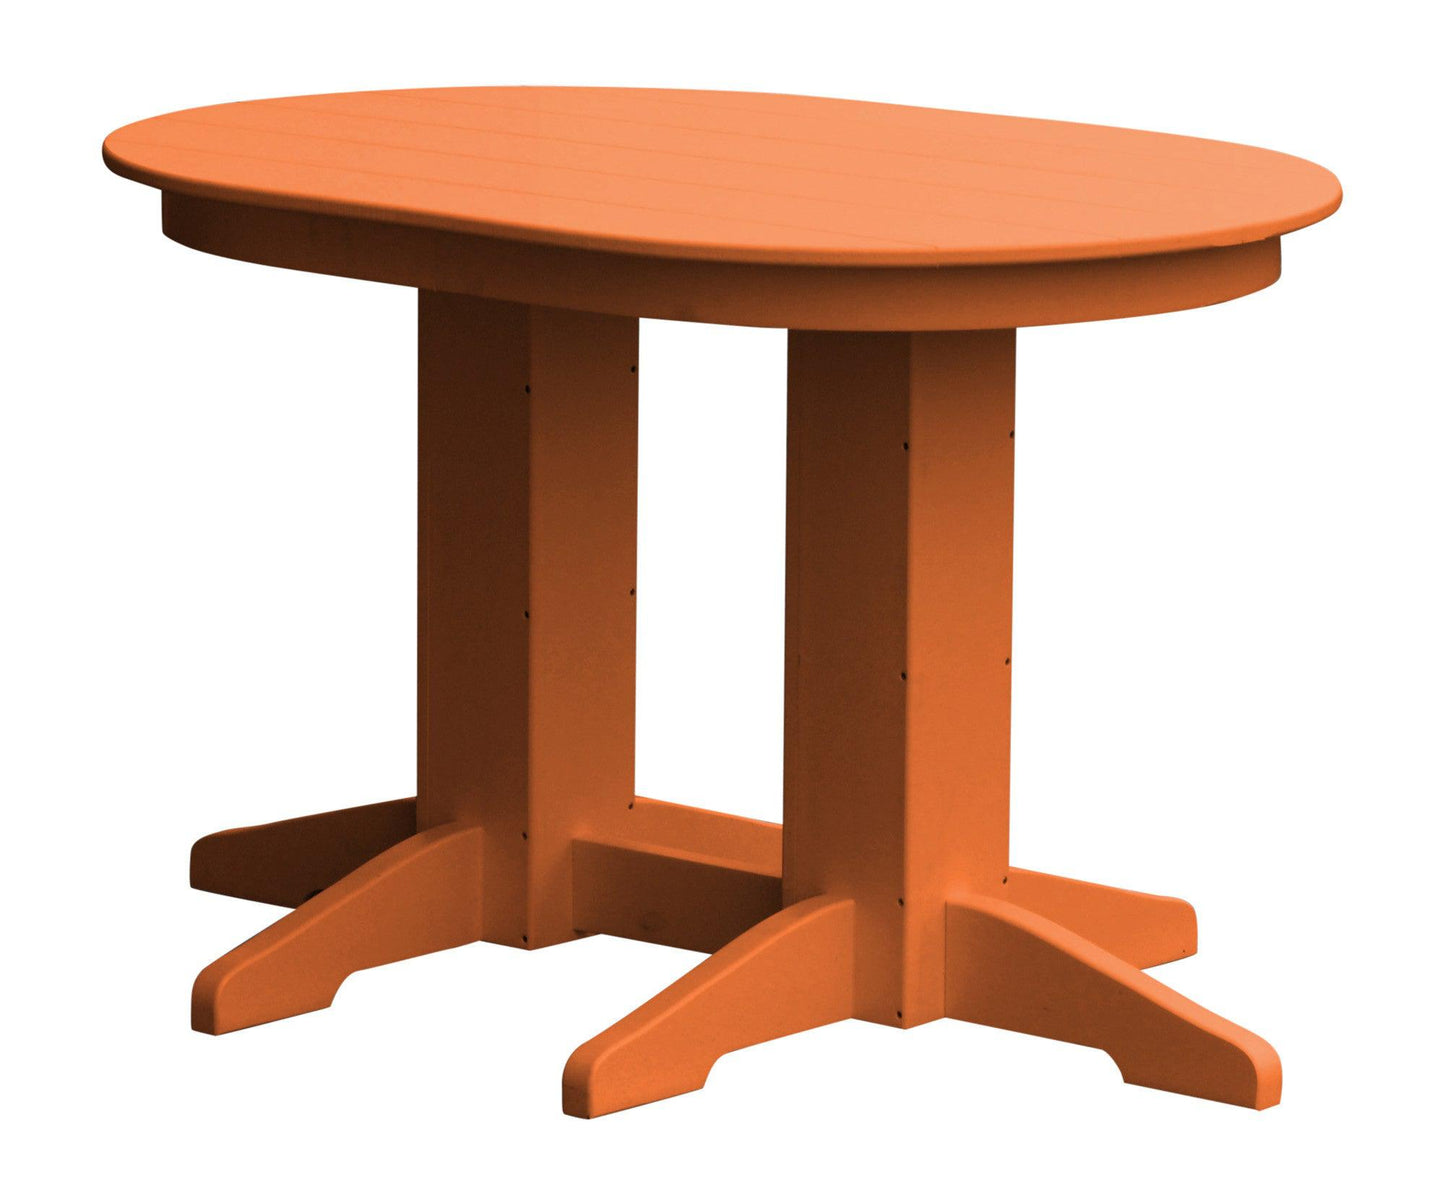 A&L Furniture Company Recycled Plastic 4'Oval Dining Table - LEAD TIME TO SHIP 10 BUSINESS DAYS